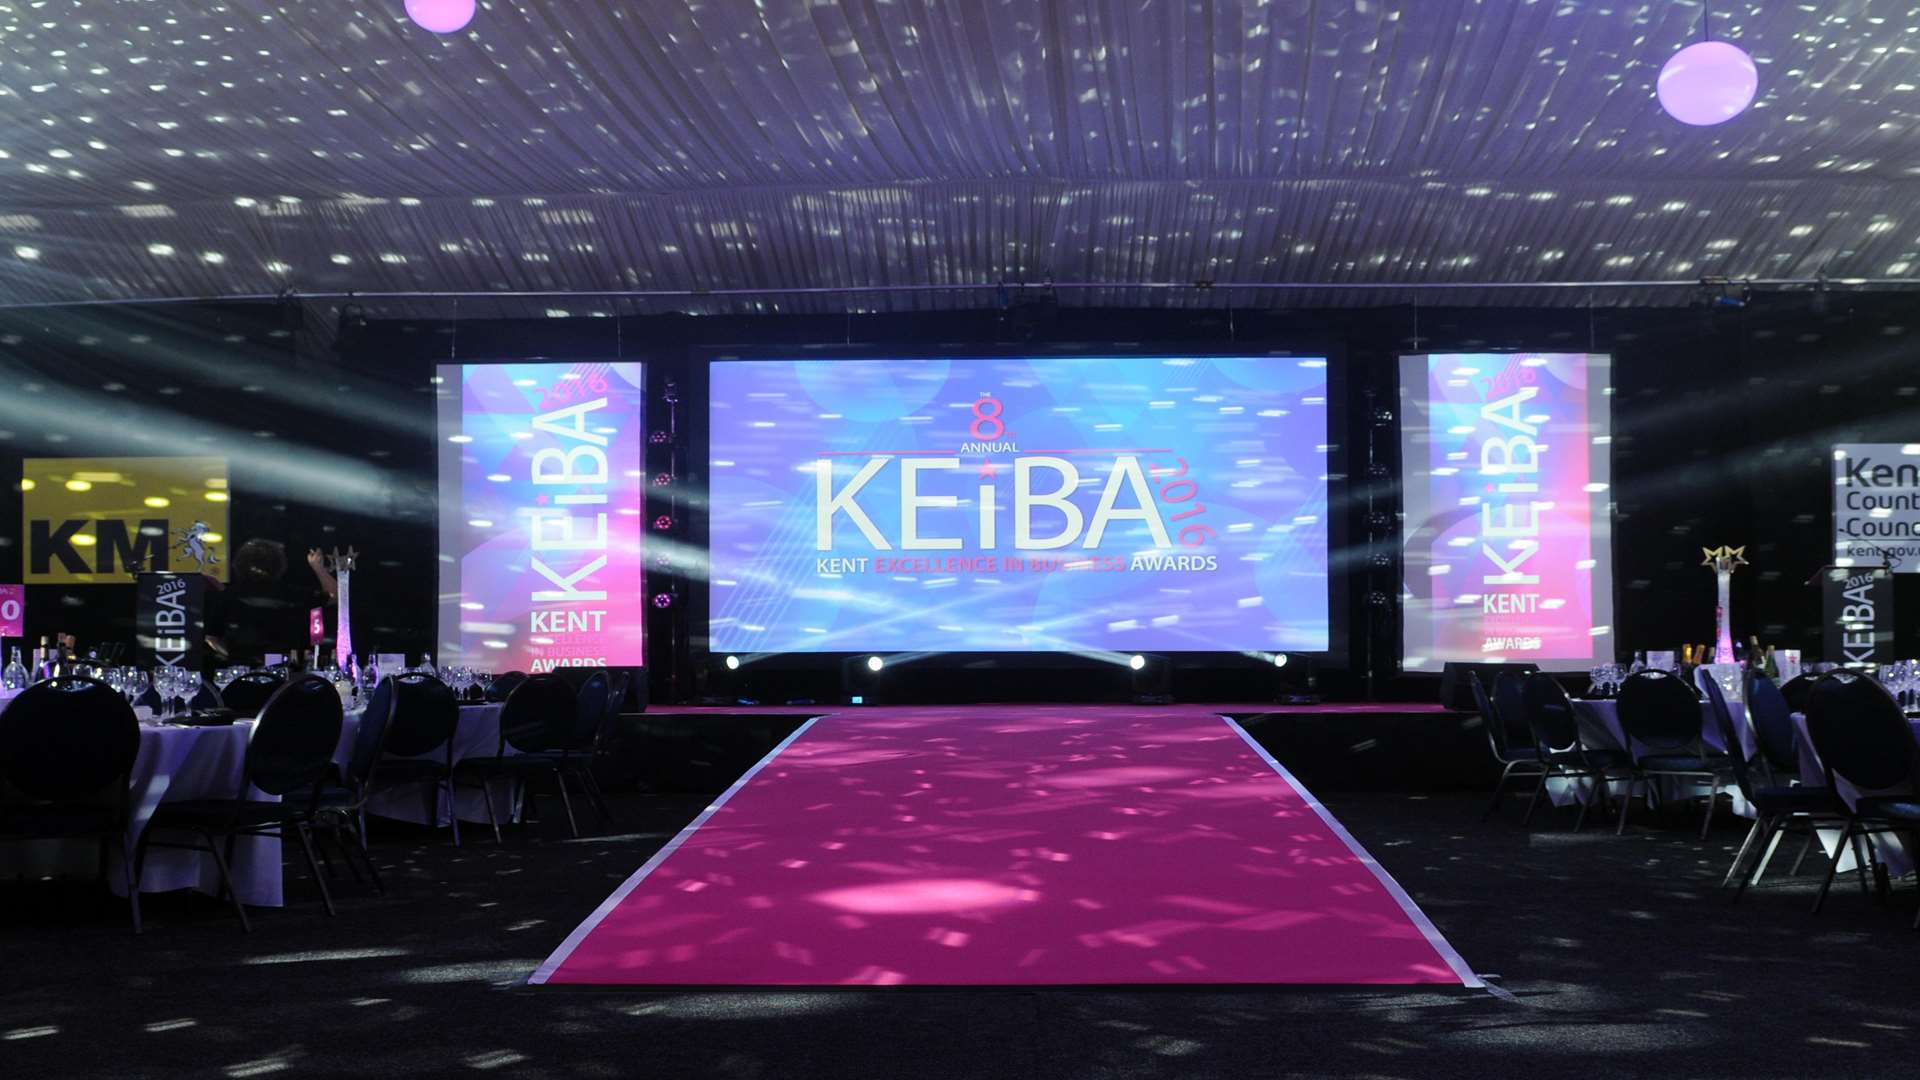 KEiBA 2017 will be hosted at the Kent Event Centre